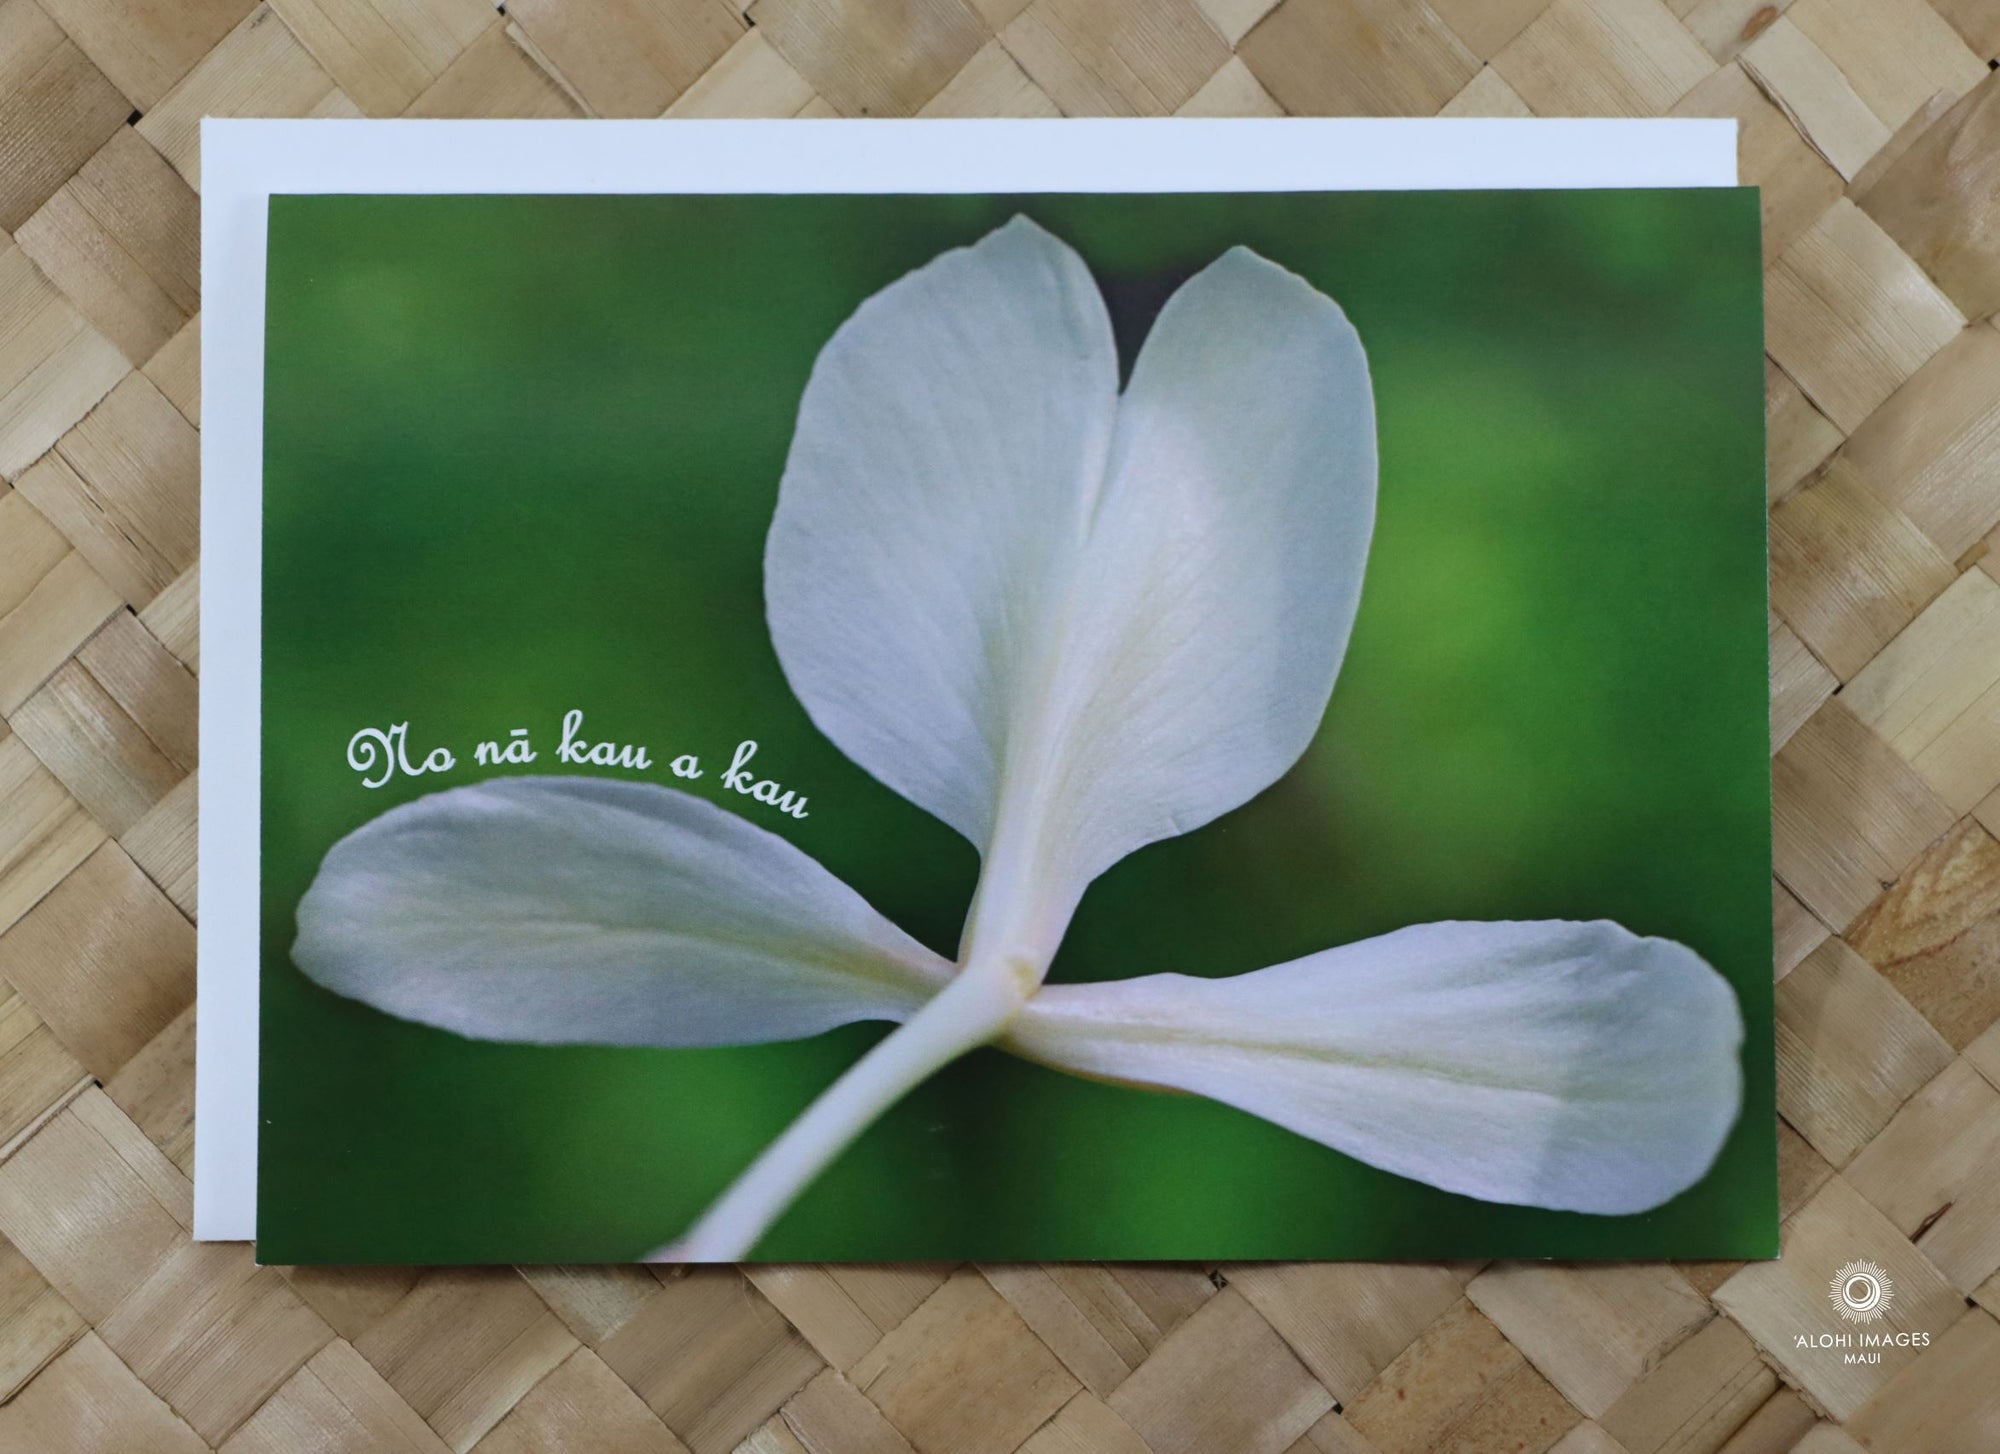 Pop-Up Mākeke - Alohi Images Maui - Awapuhi (White Ginger) - WeddingAnniversary Greeting Card - Forever and Ever - Front View